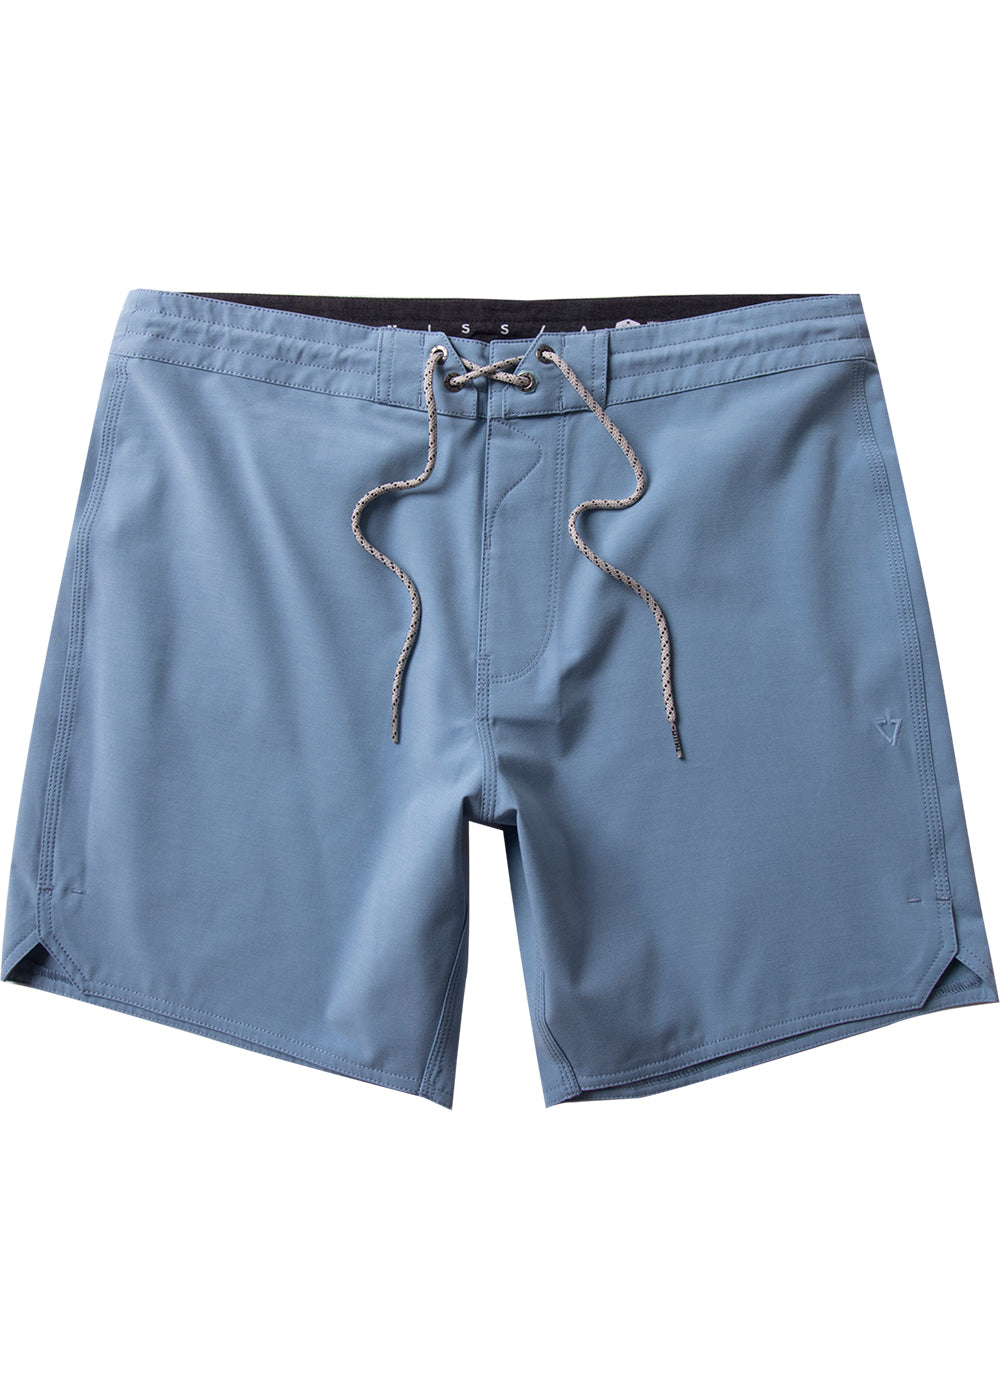 Vissla Men's cool blue Short Sets 16.5" Board short with white rope. Velcro pocket with patch. Front view